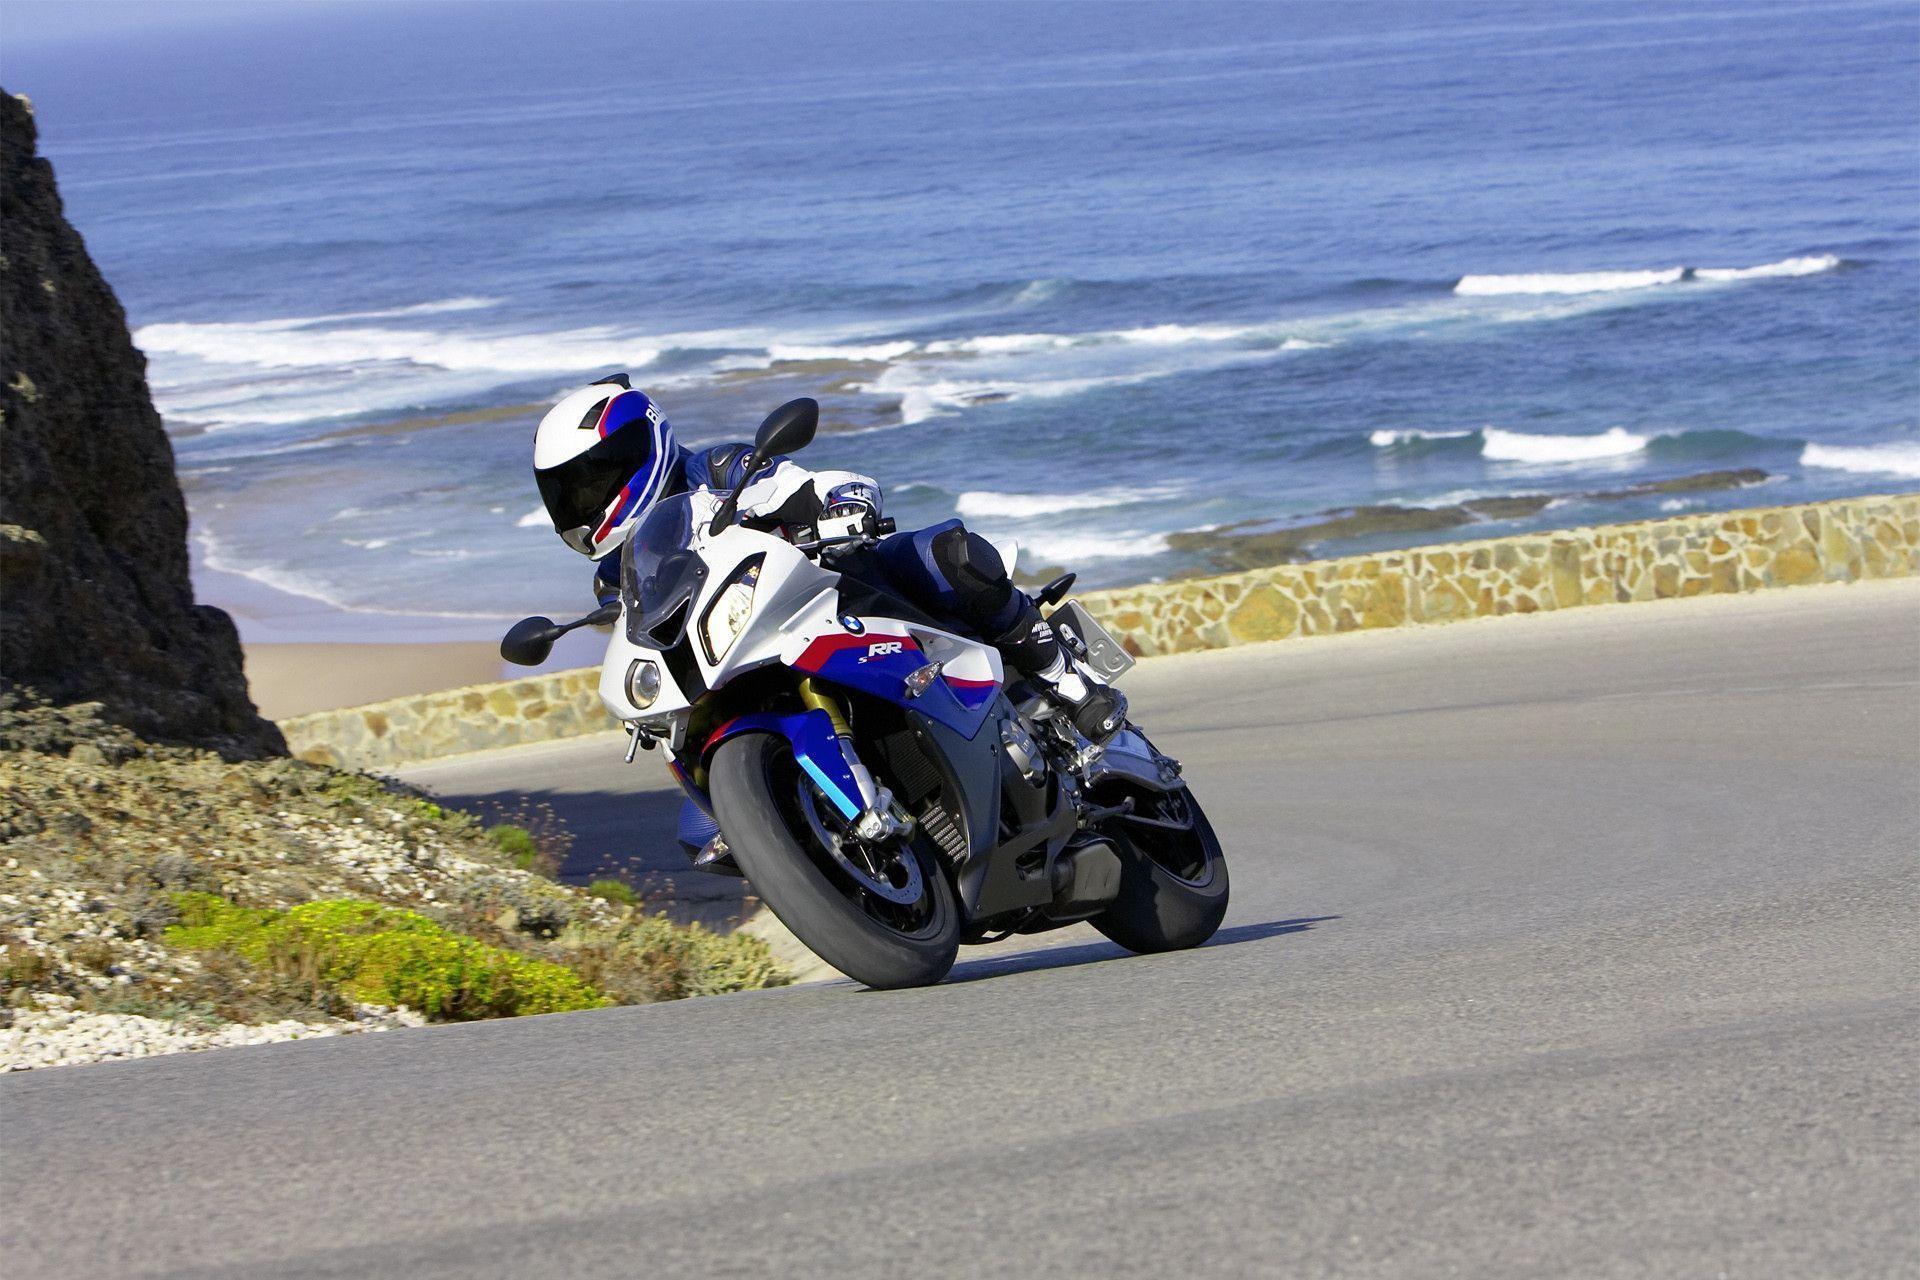 BMW S1000RR picture # 71065. BMW photo gallery